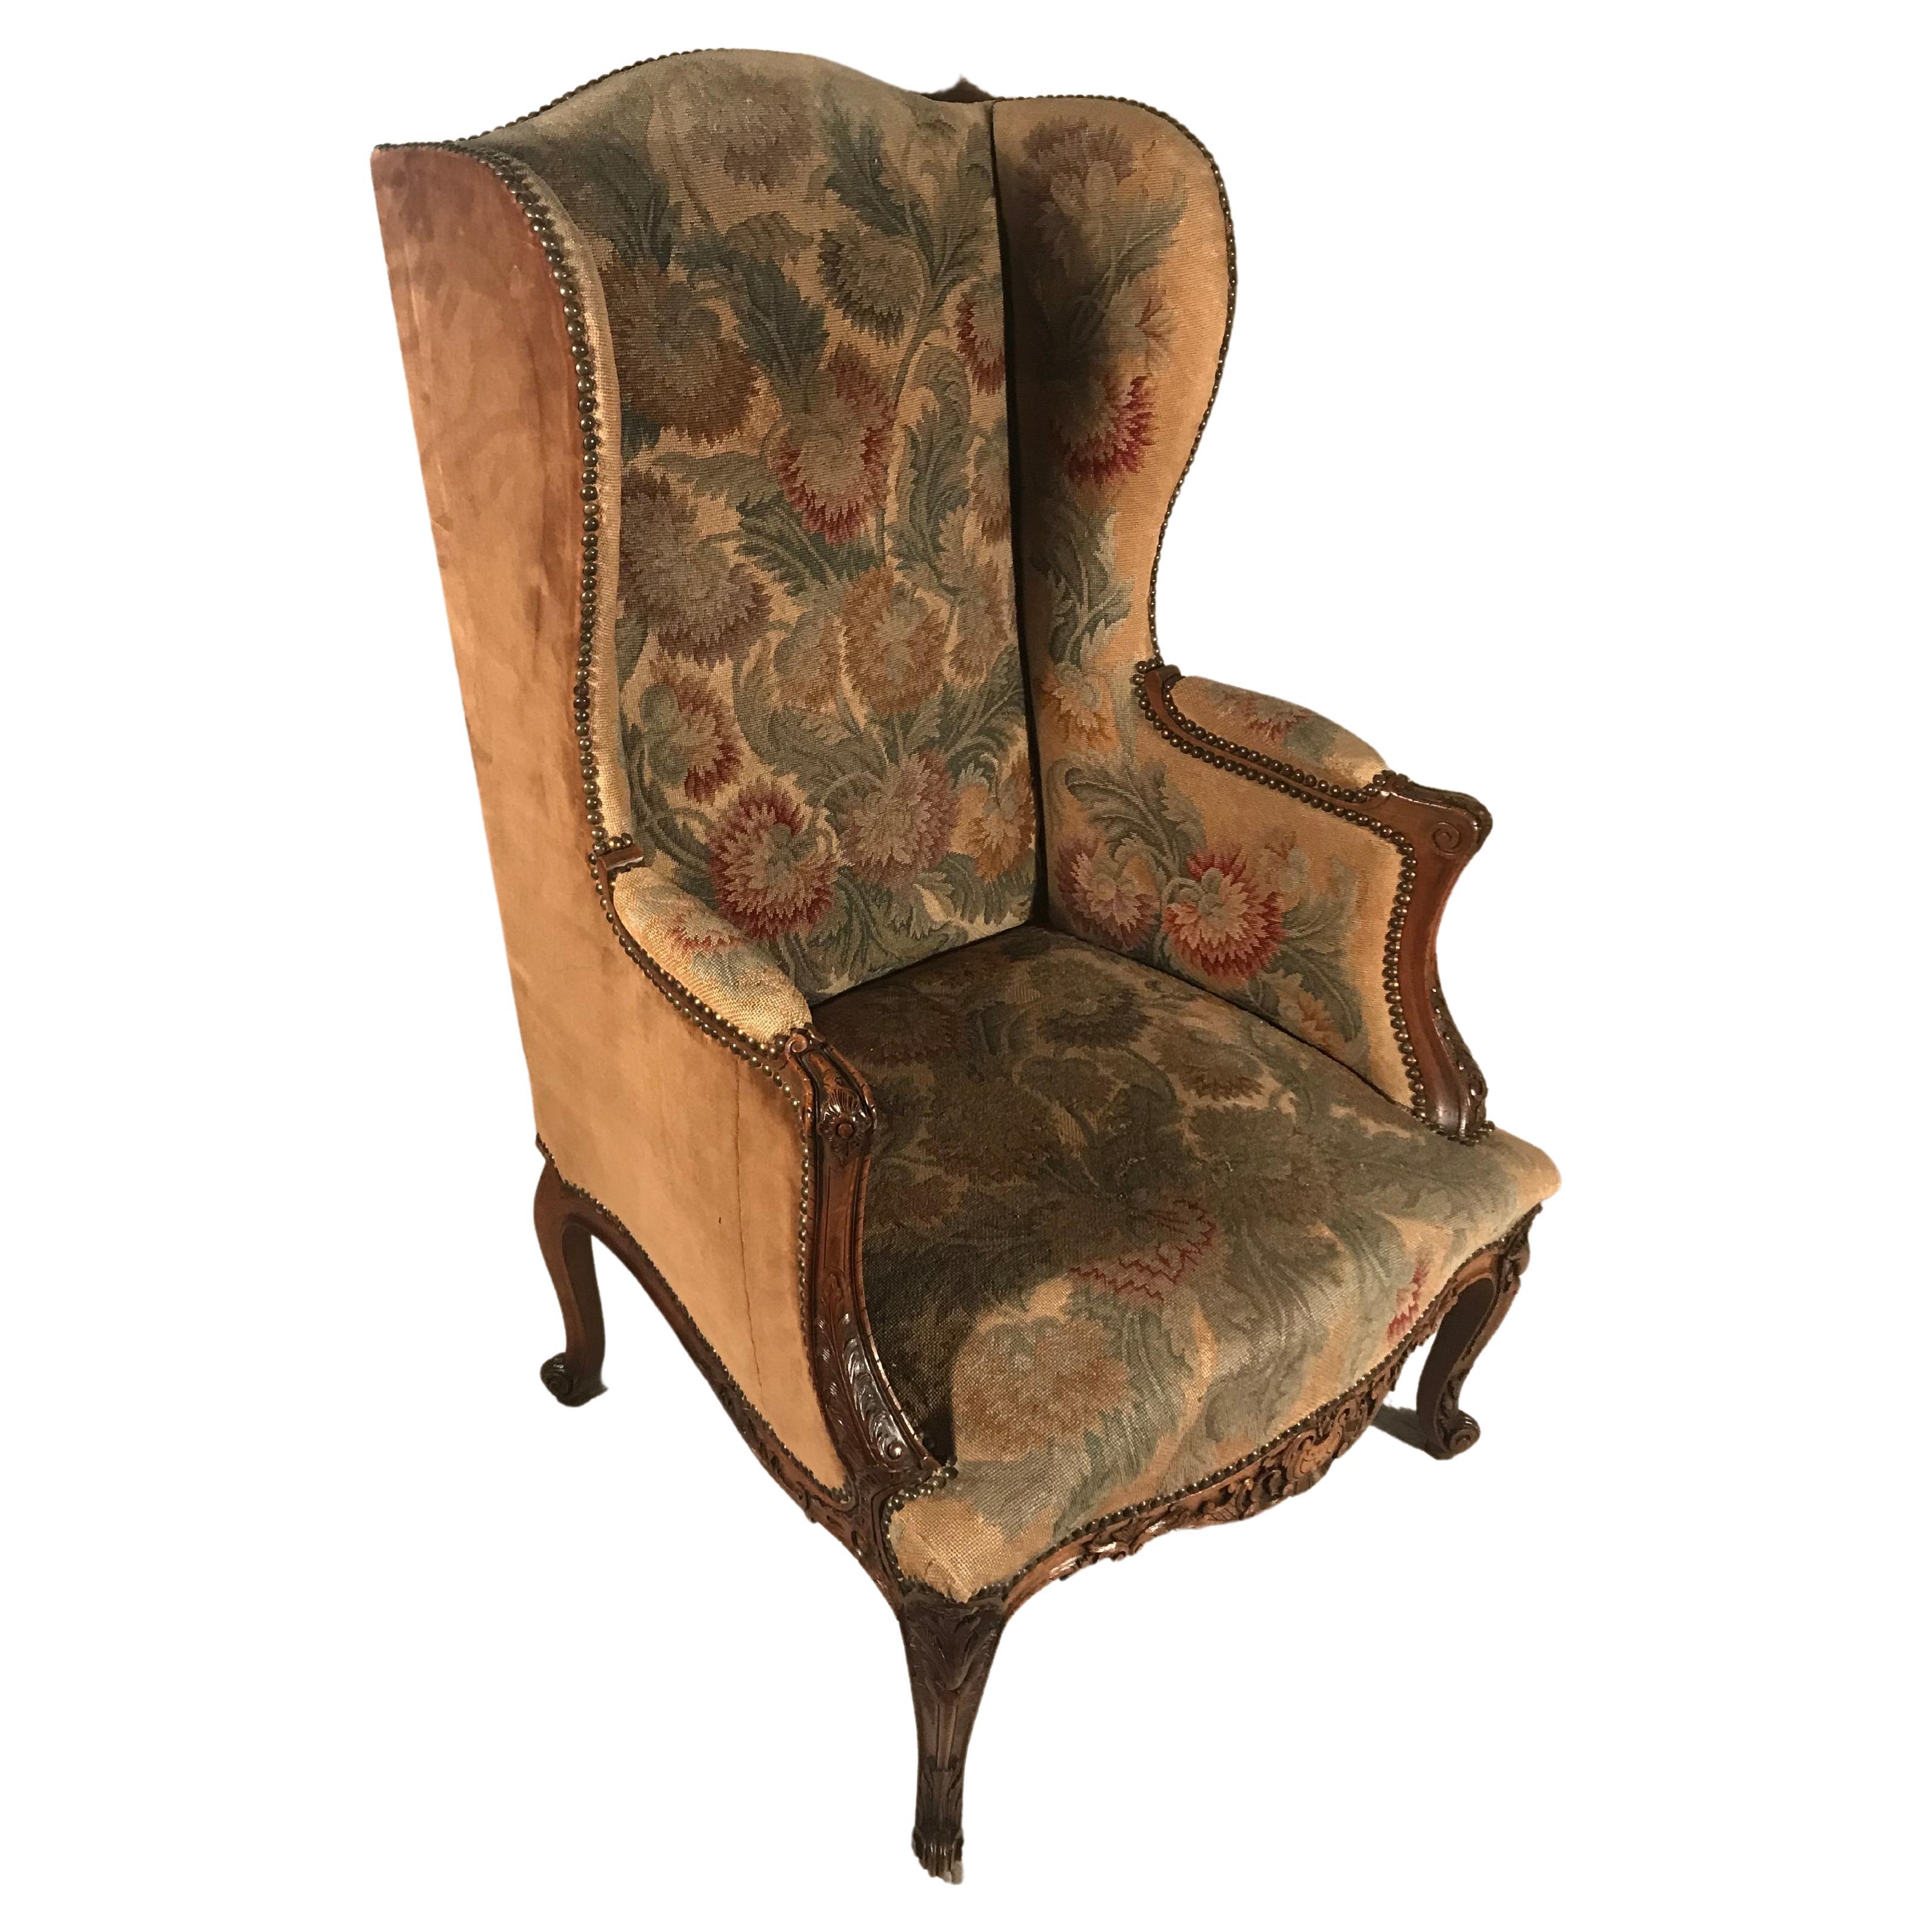 Baroque Wingback Armchair, Germany 18th century